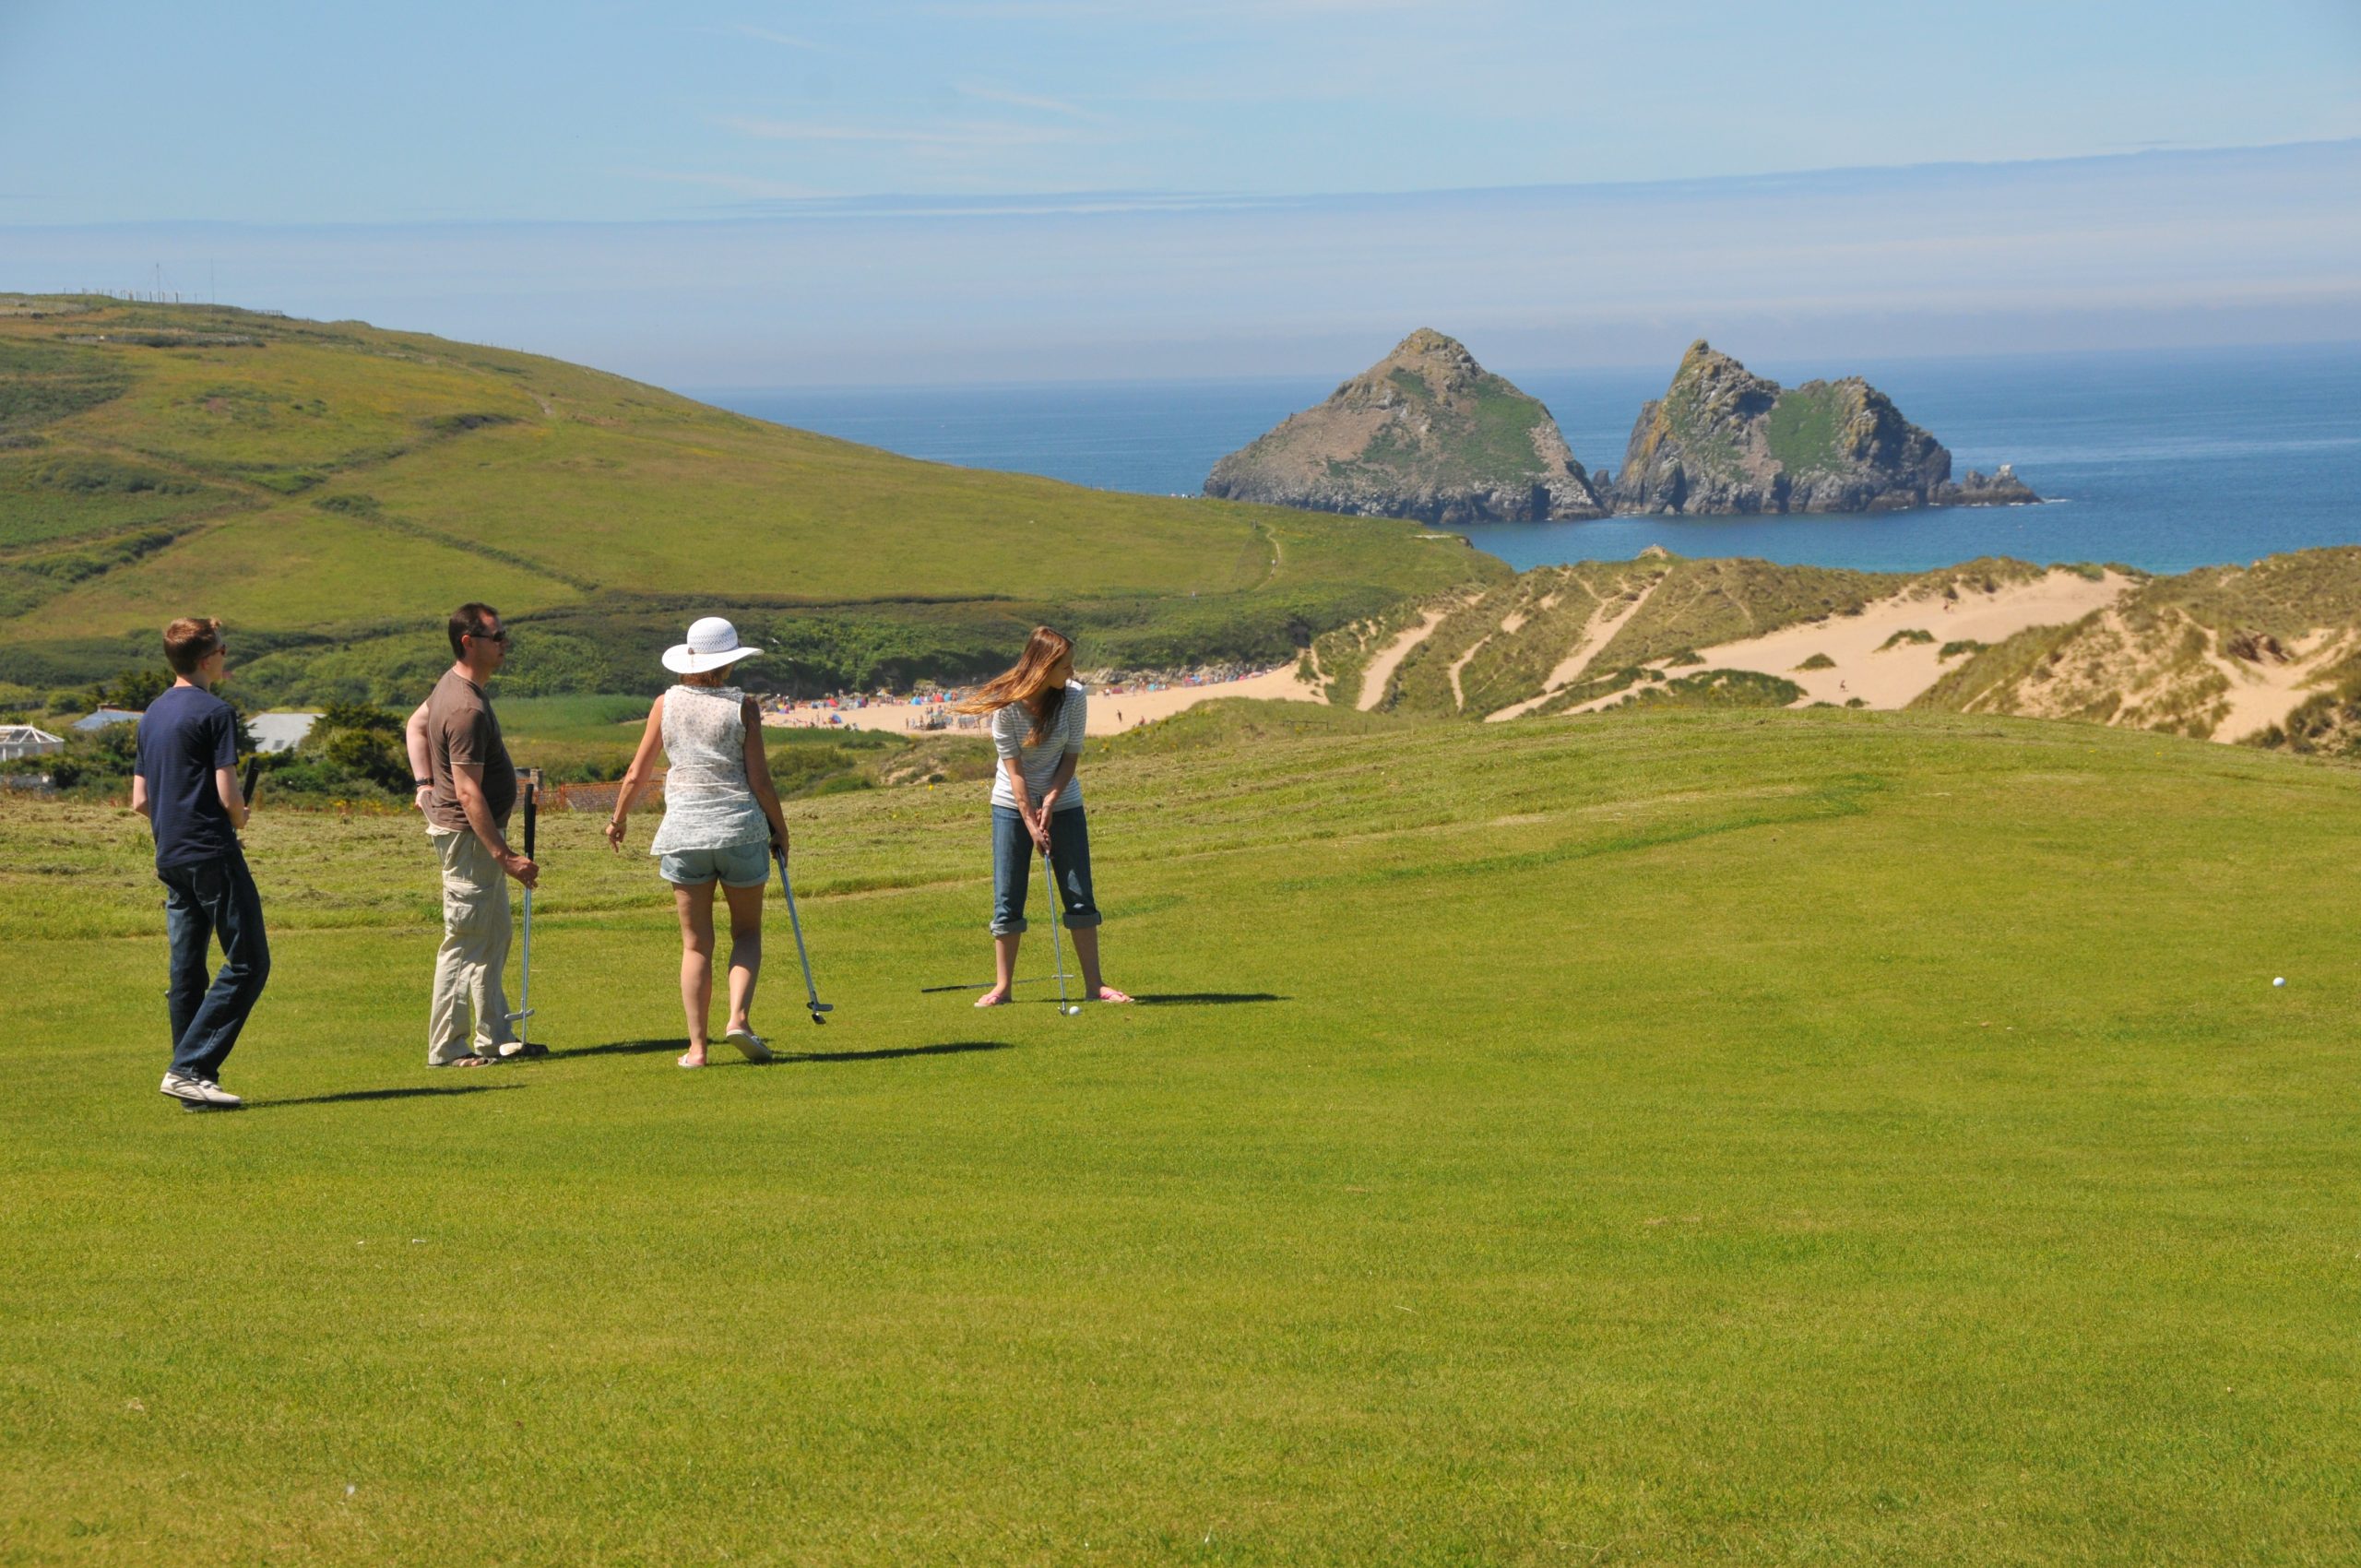 Golf tips for beginners at Holywell Bay Golf Course